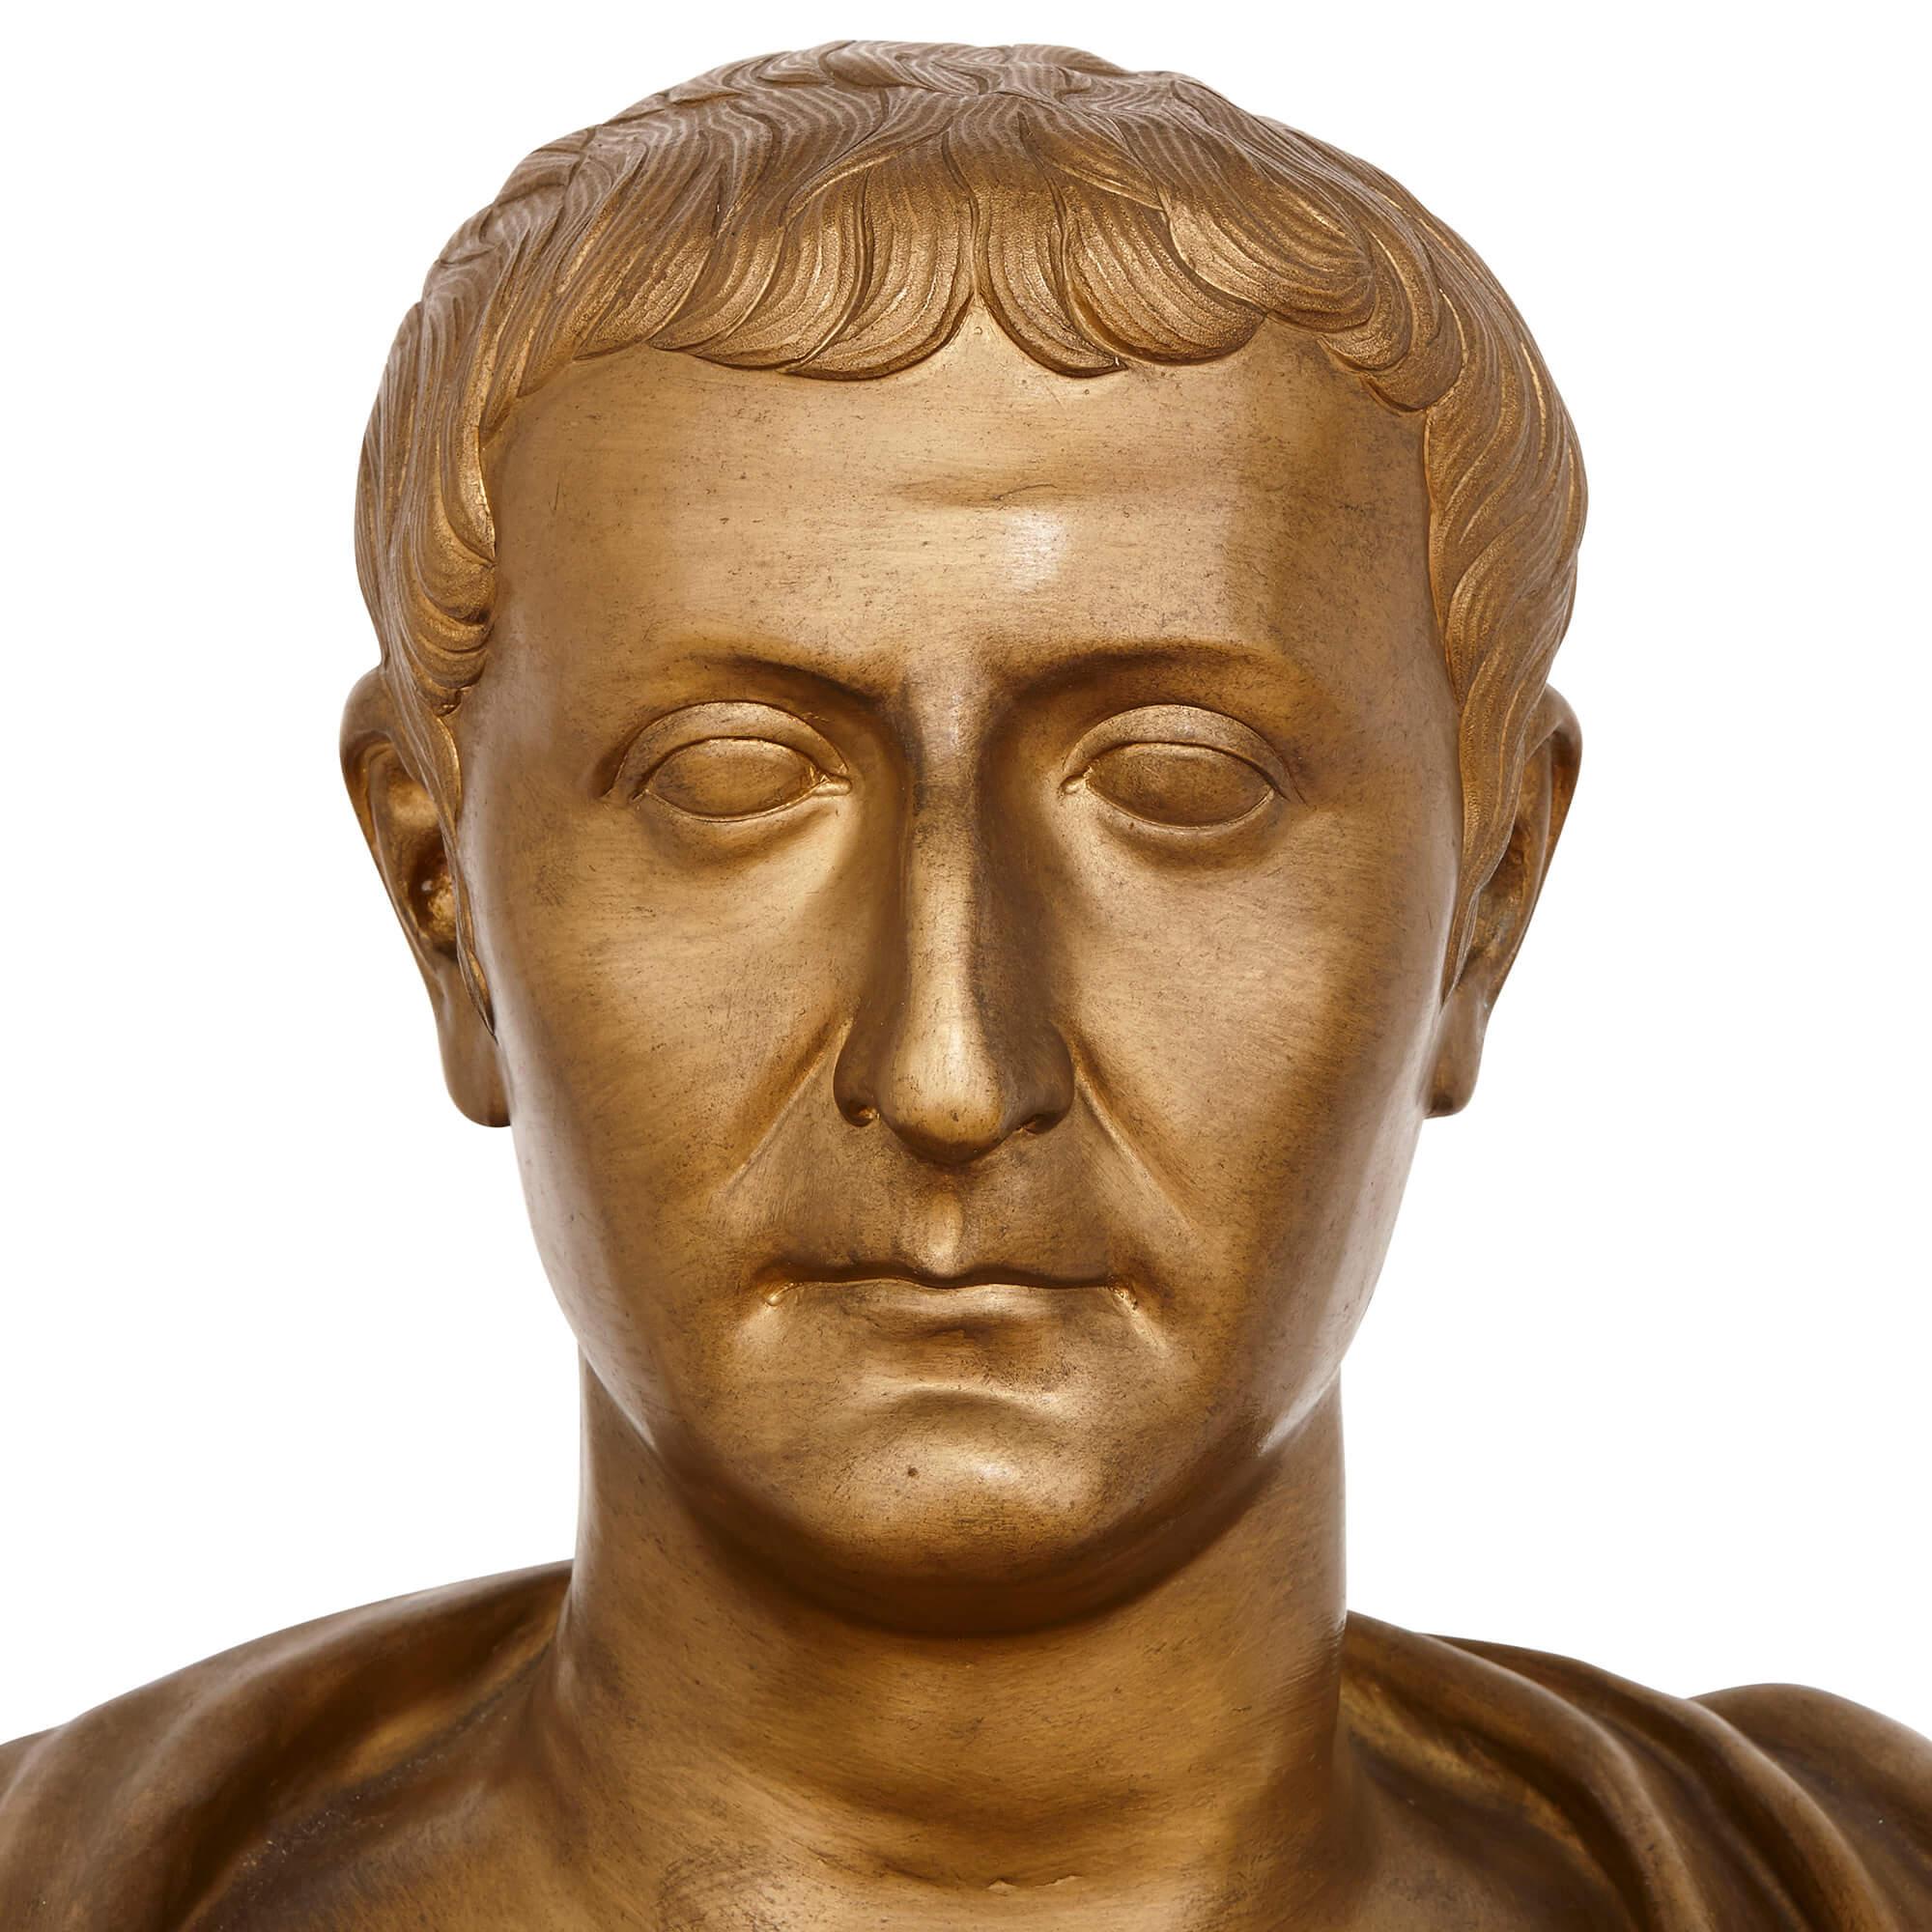 This remarkable ormolu bust of the iconic Roman Emperor Julius Caesar is the epitome of neoclassical style design, and was originally intended as an overdoor decoration. Overdoors - decorative elements applied above doorways - became popular in the